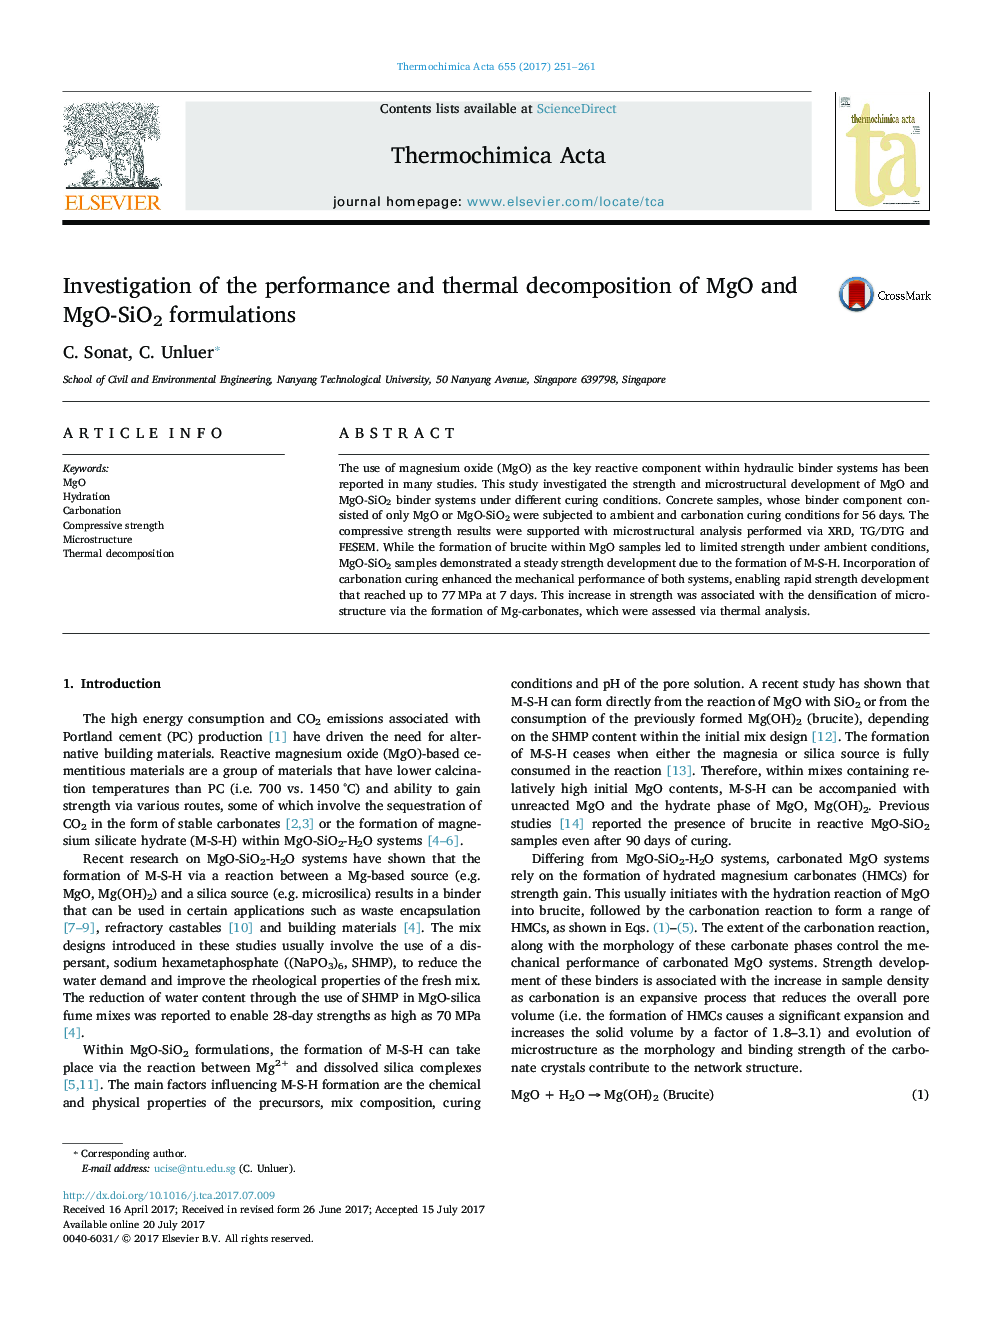 Investigation of the performance and thermal decomposition of MgO and MgO-SiO2 formulations